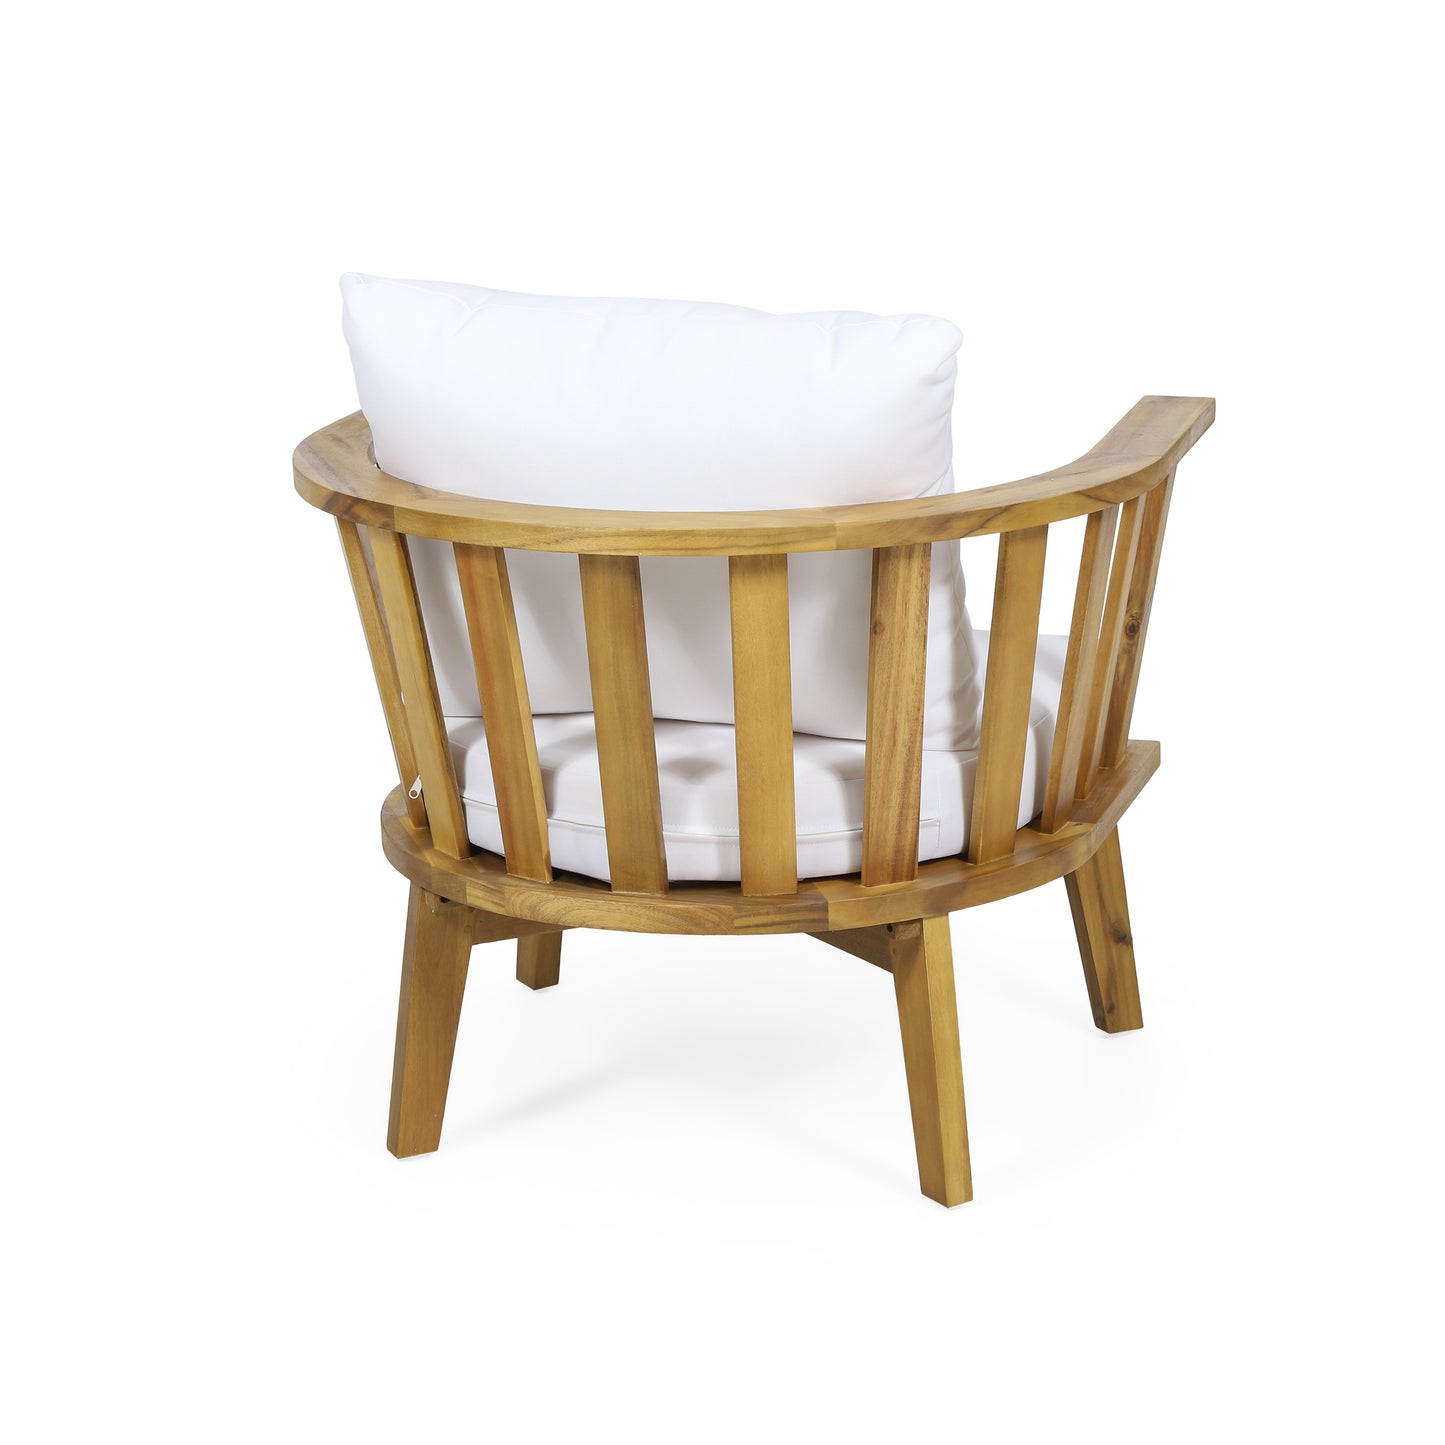 Heloise Outdoor Acacia Wood 2 Seater Club Chairs and Side Table Set